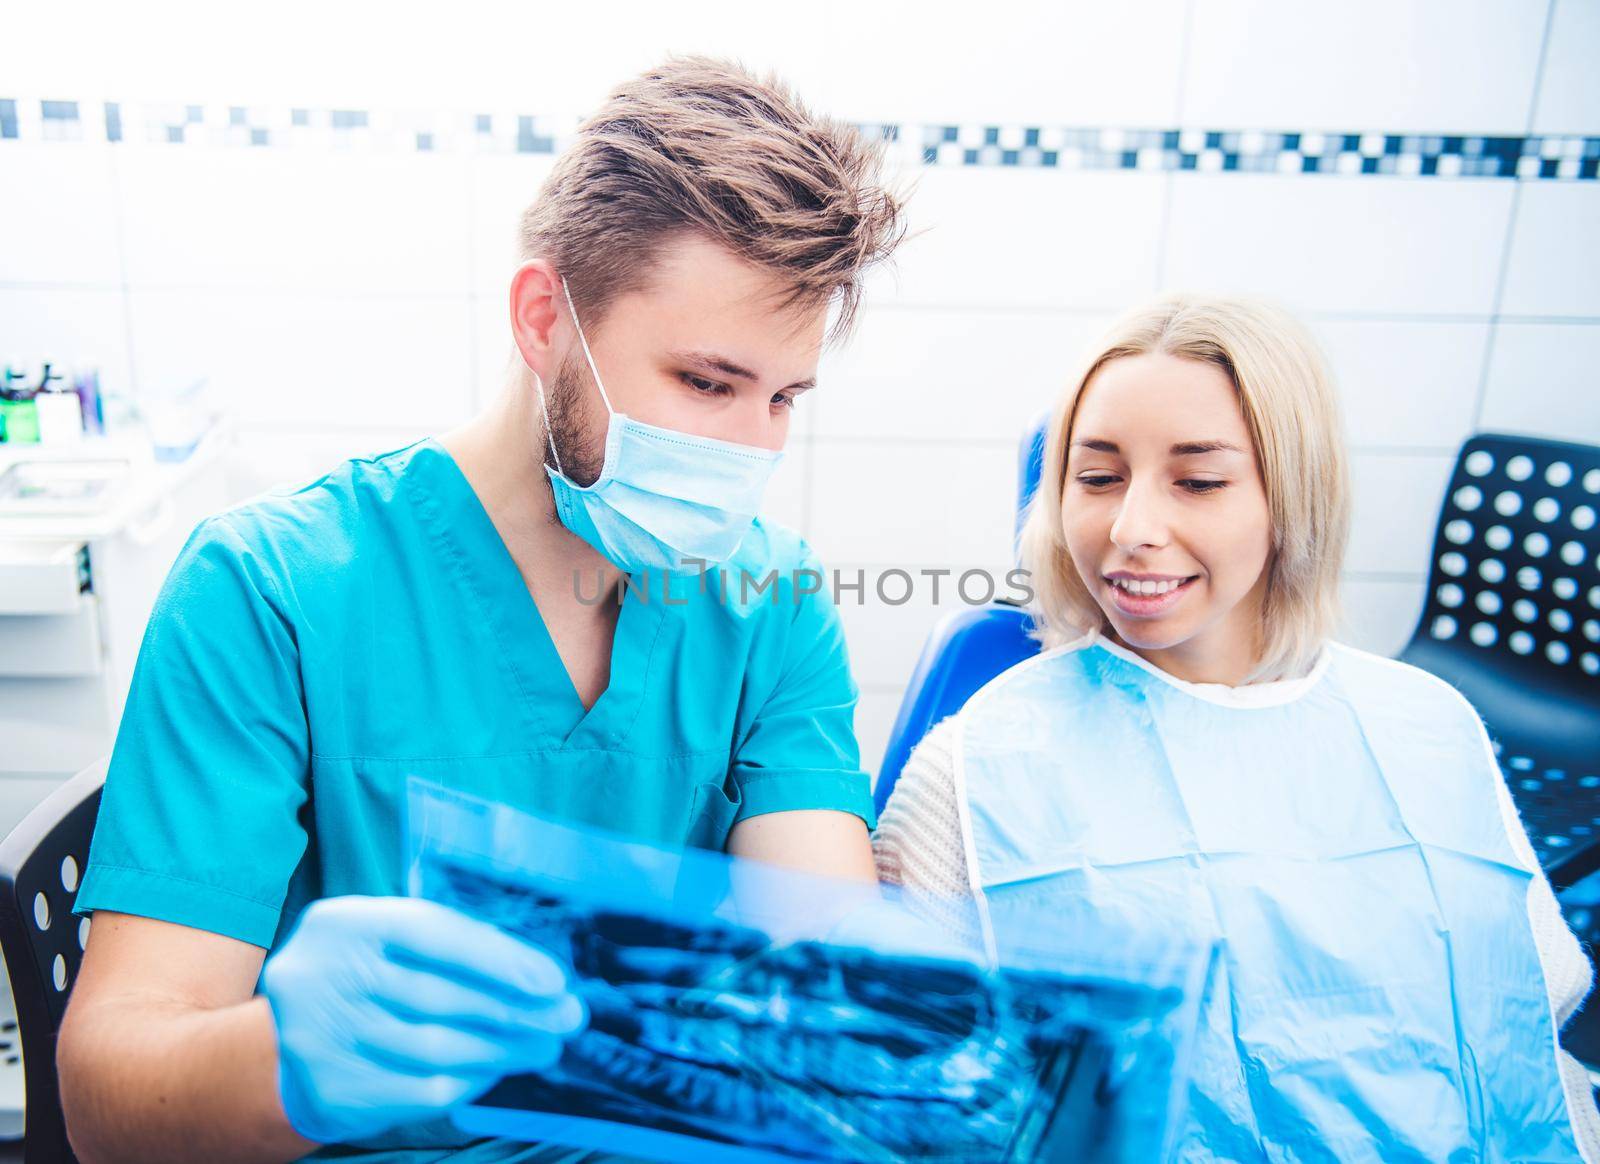 Dentist in mask showing patient dental x-ray